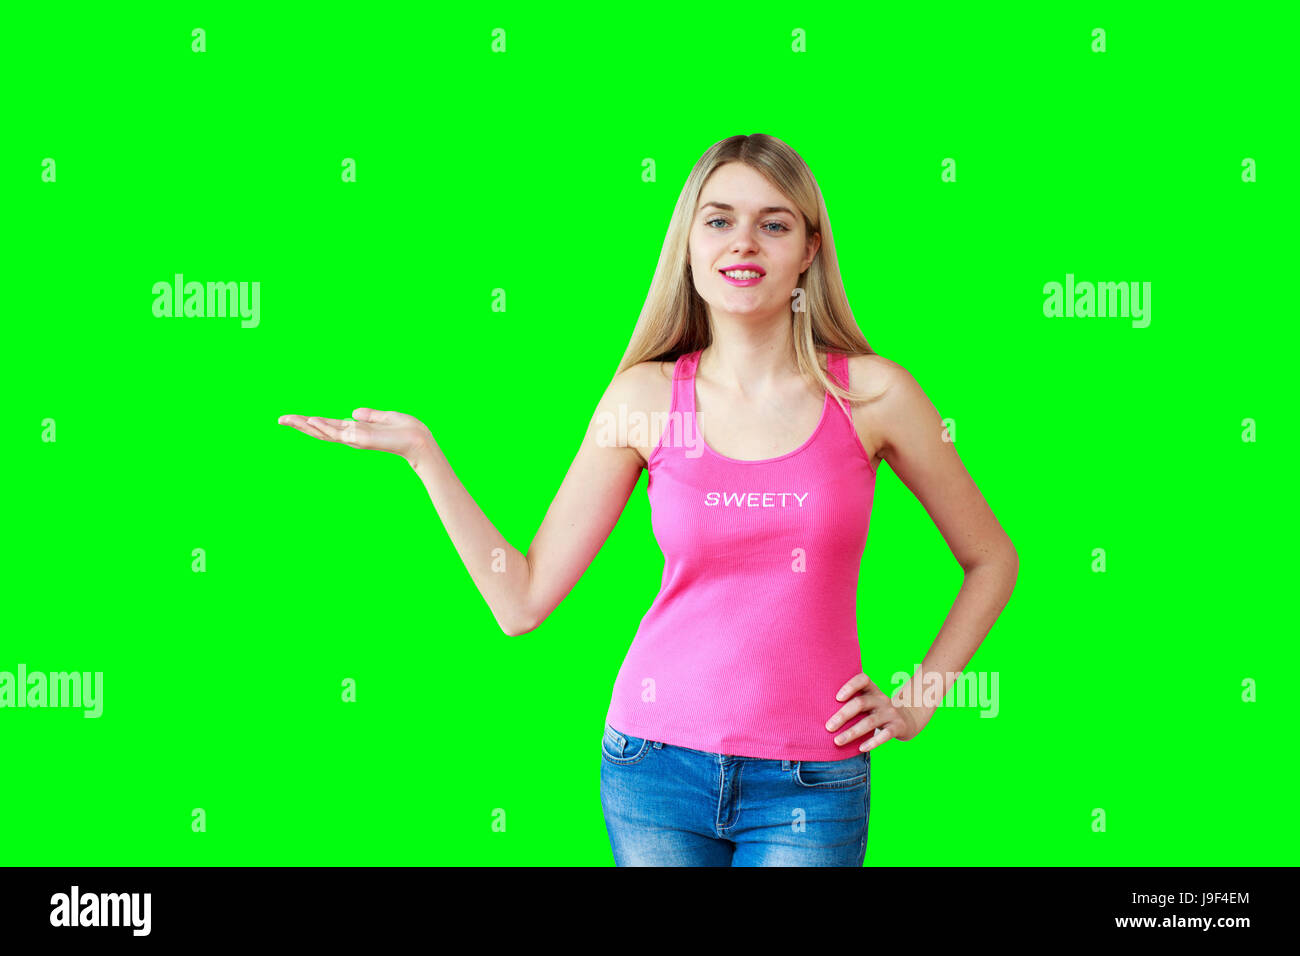 Woman showing your product or message smiling happy Isolated on green screen  chroma key background. Beautiful girl in pink tank top showing open hand  Stock Photo - Alamy